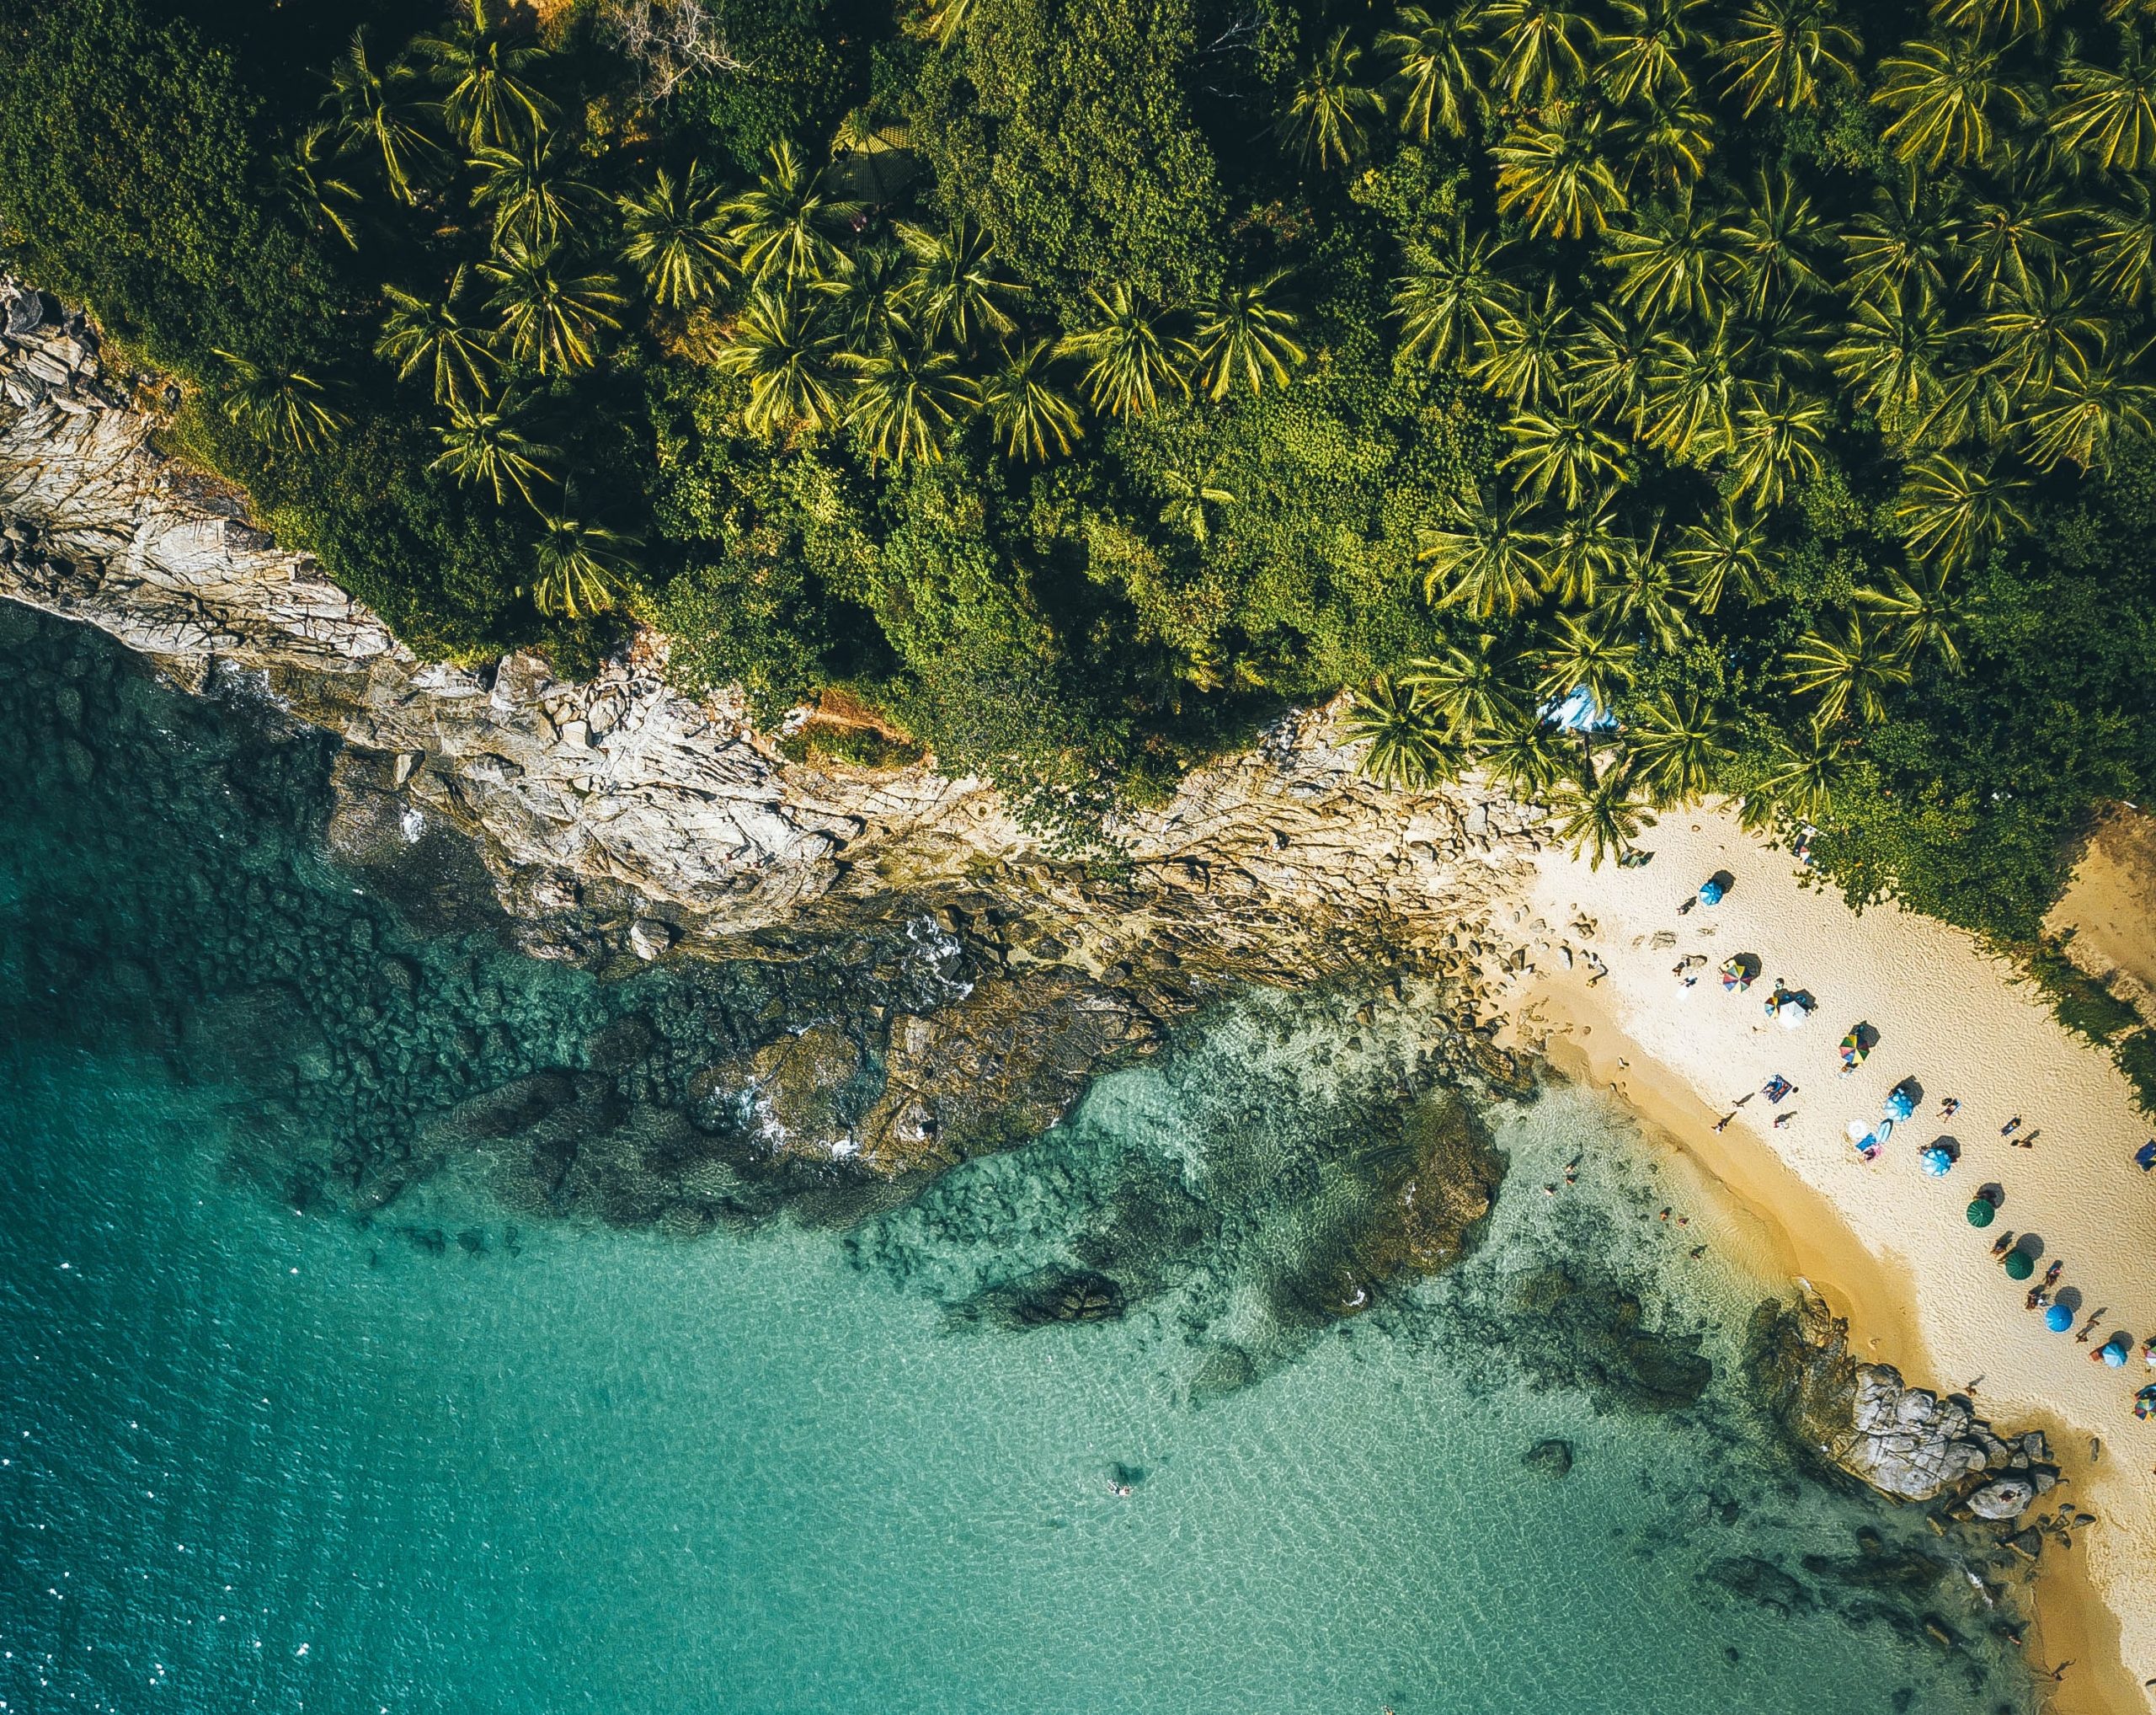 Surin beach as seen from above - perfect for honeymooners